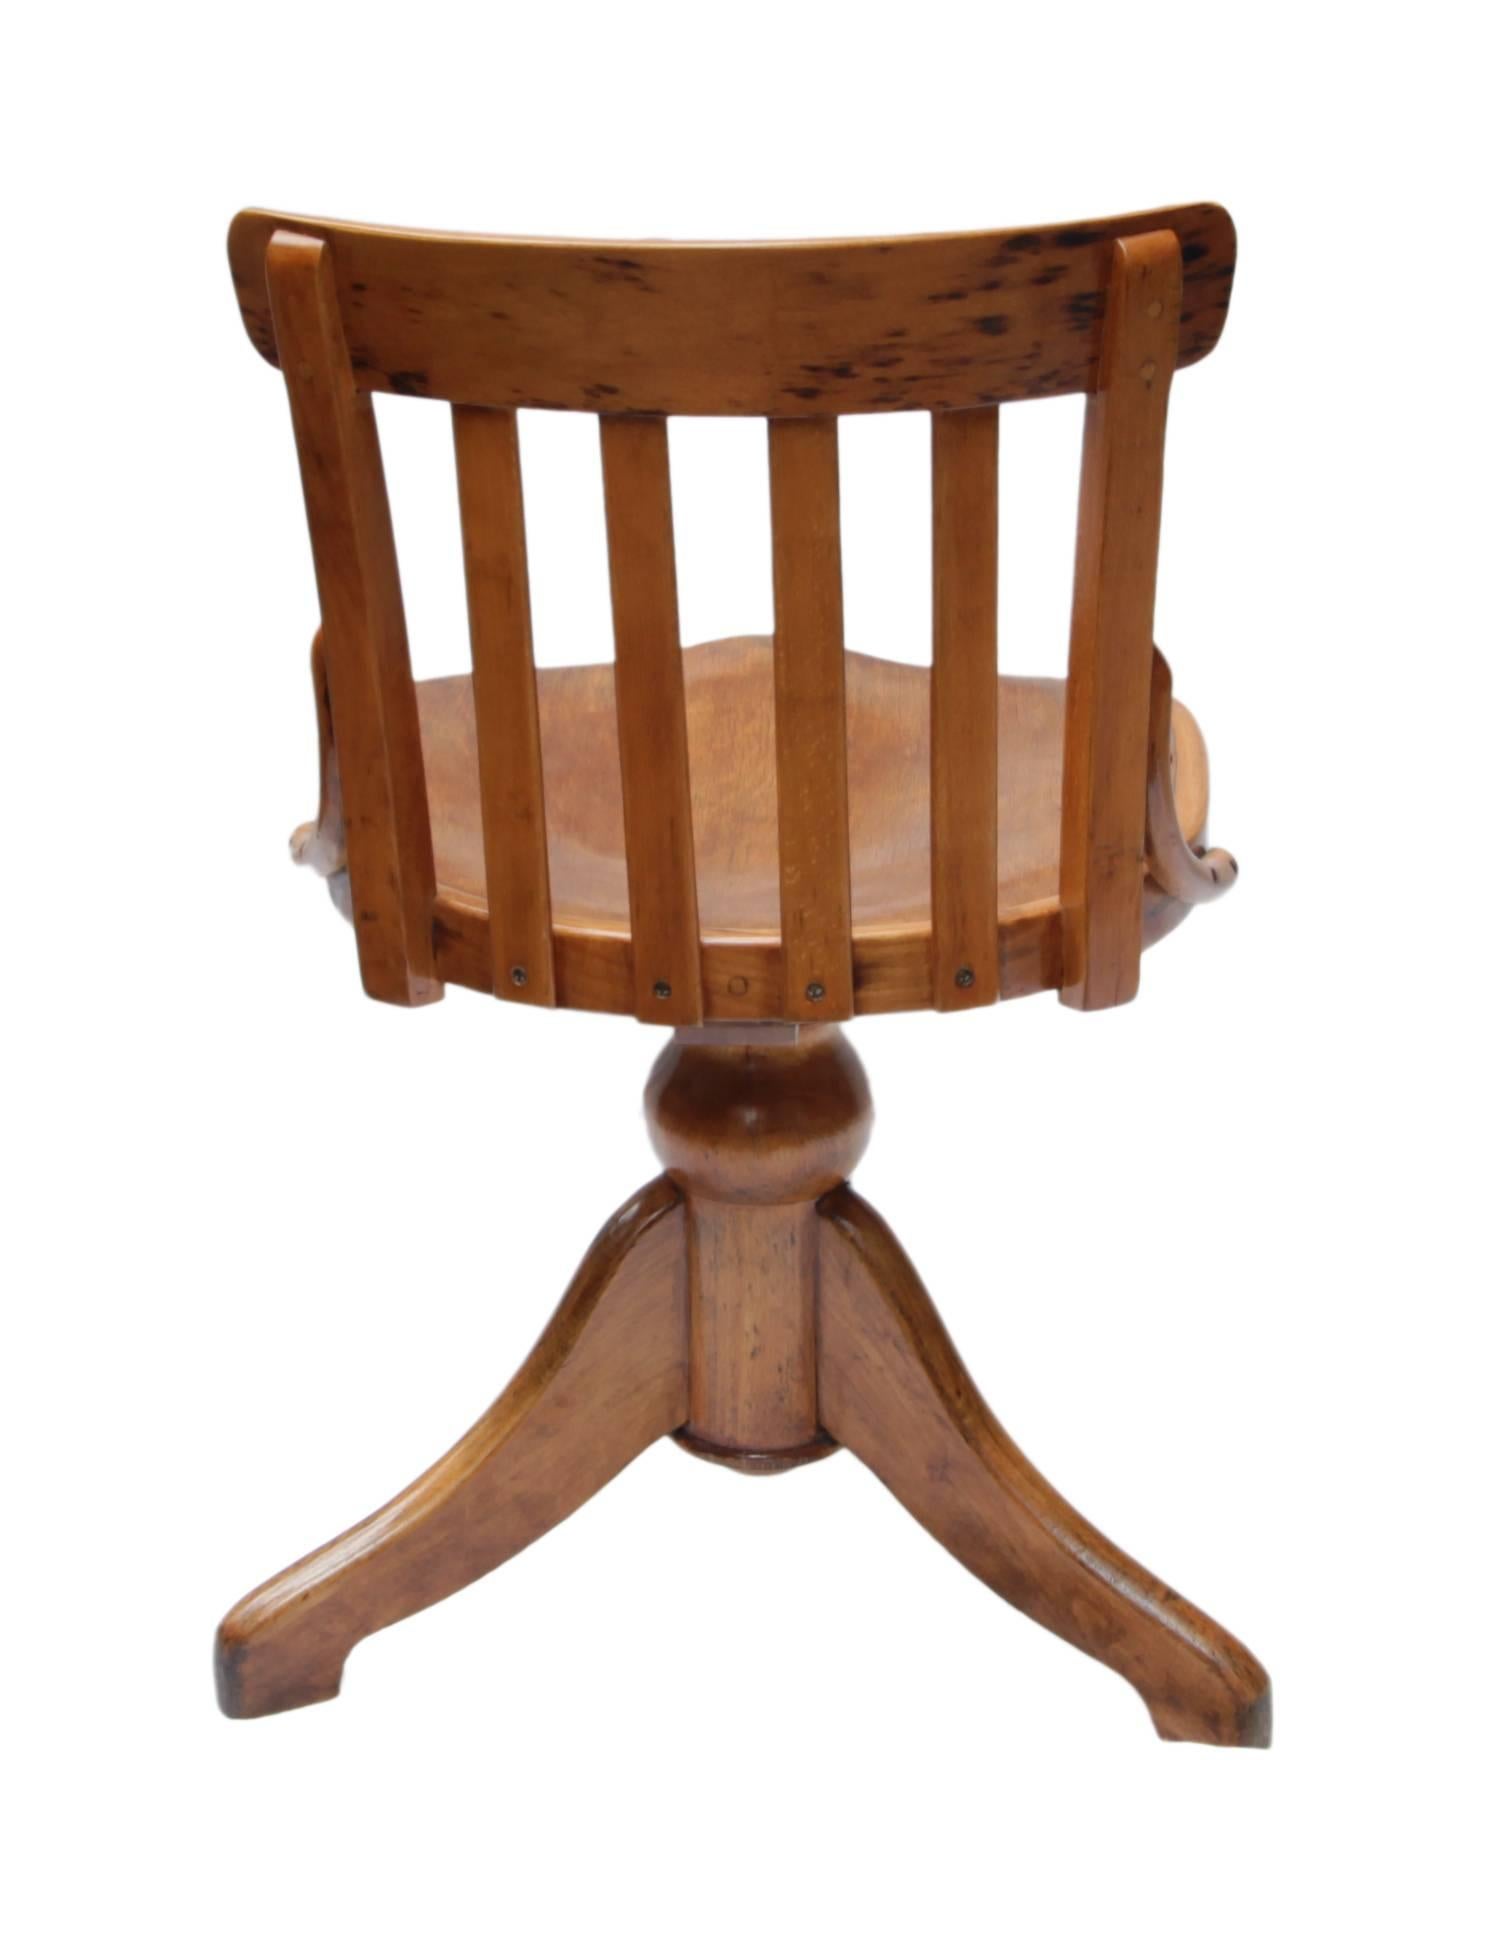 German Art Nouveau Soild Beechwood Chair to Turn for Height Adjustable For Sale